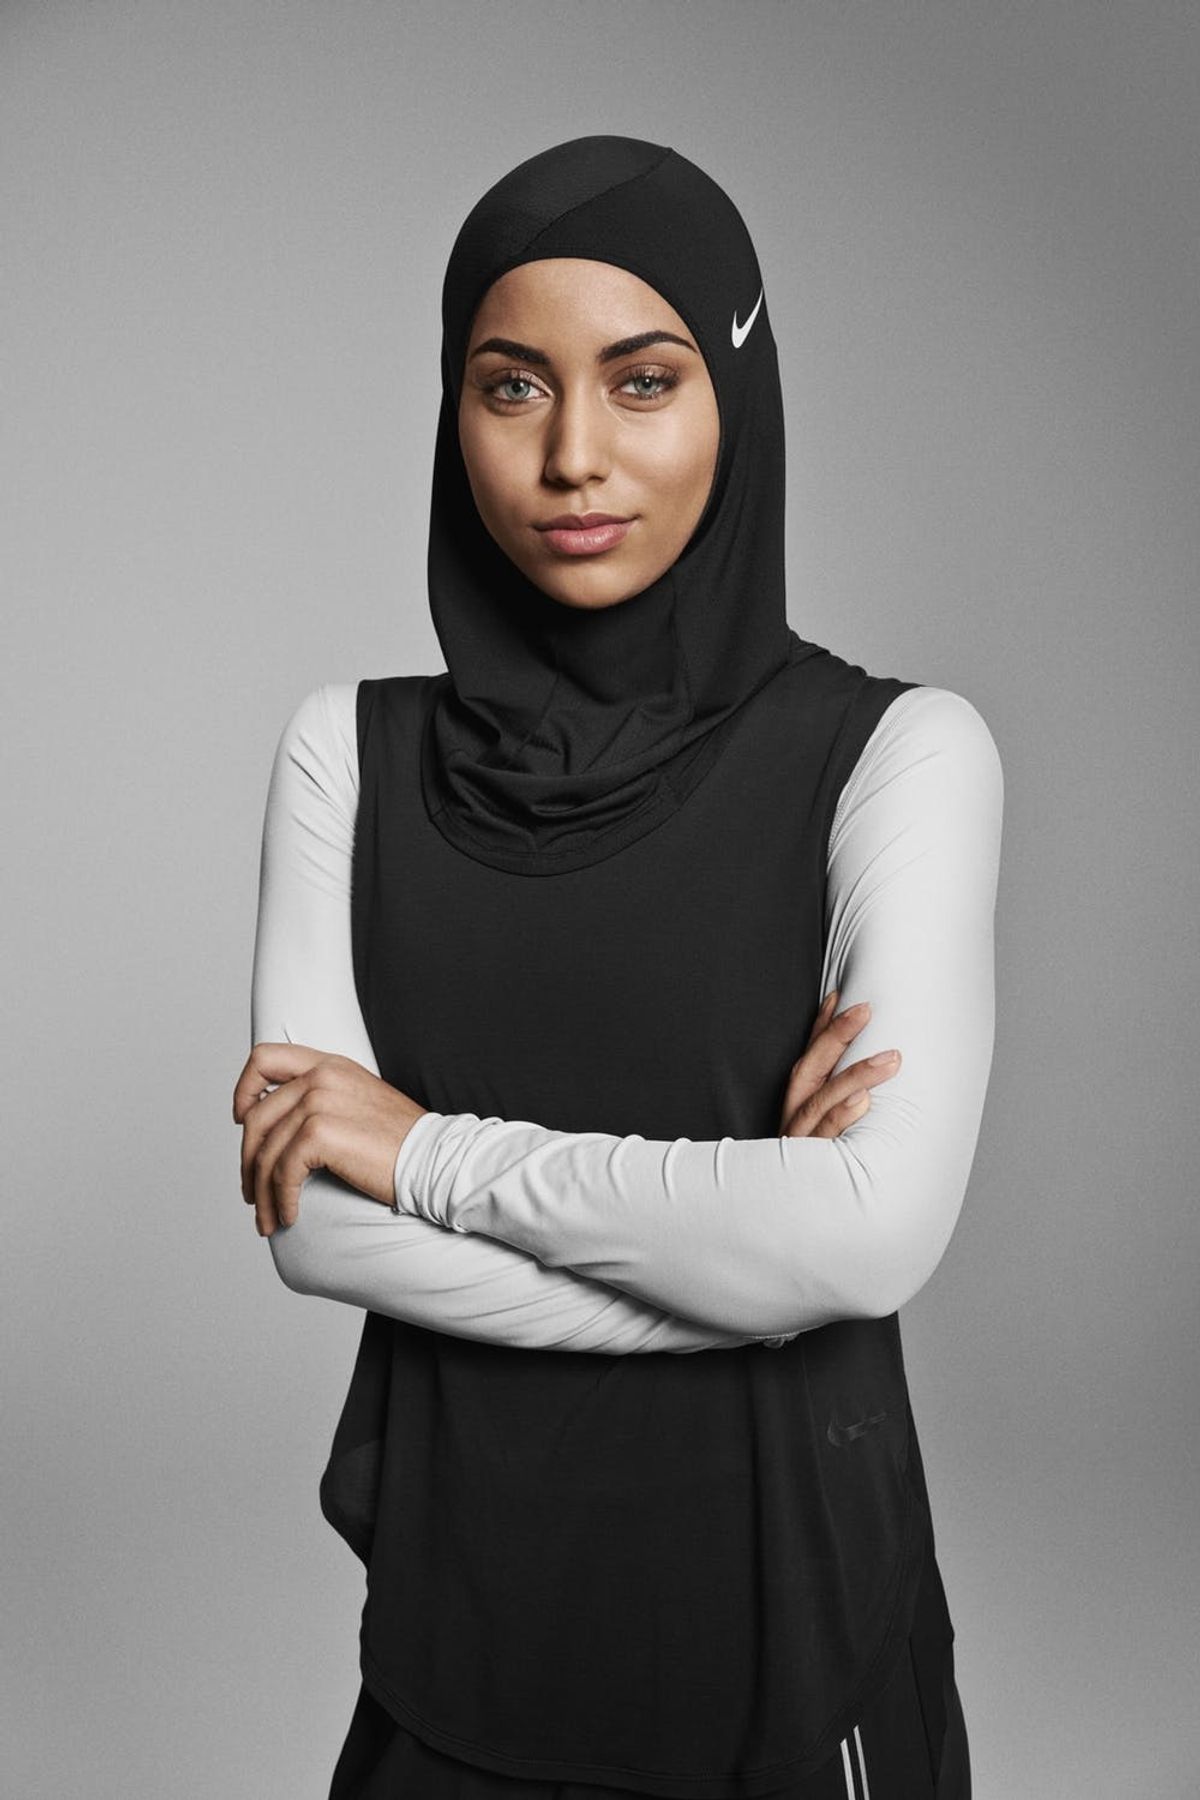 Nike Is Releasing a Hijab Collection and We Are All About It